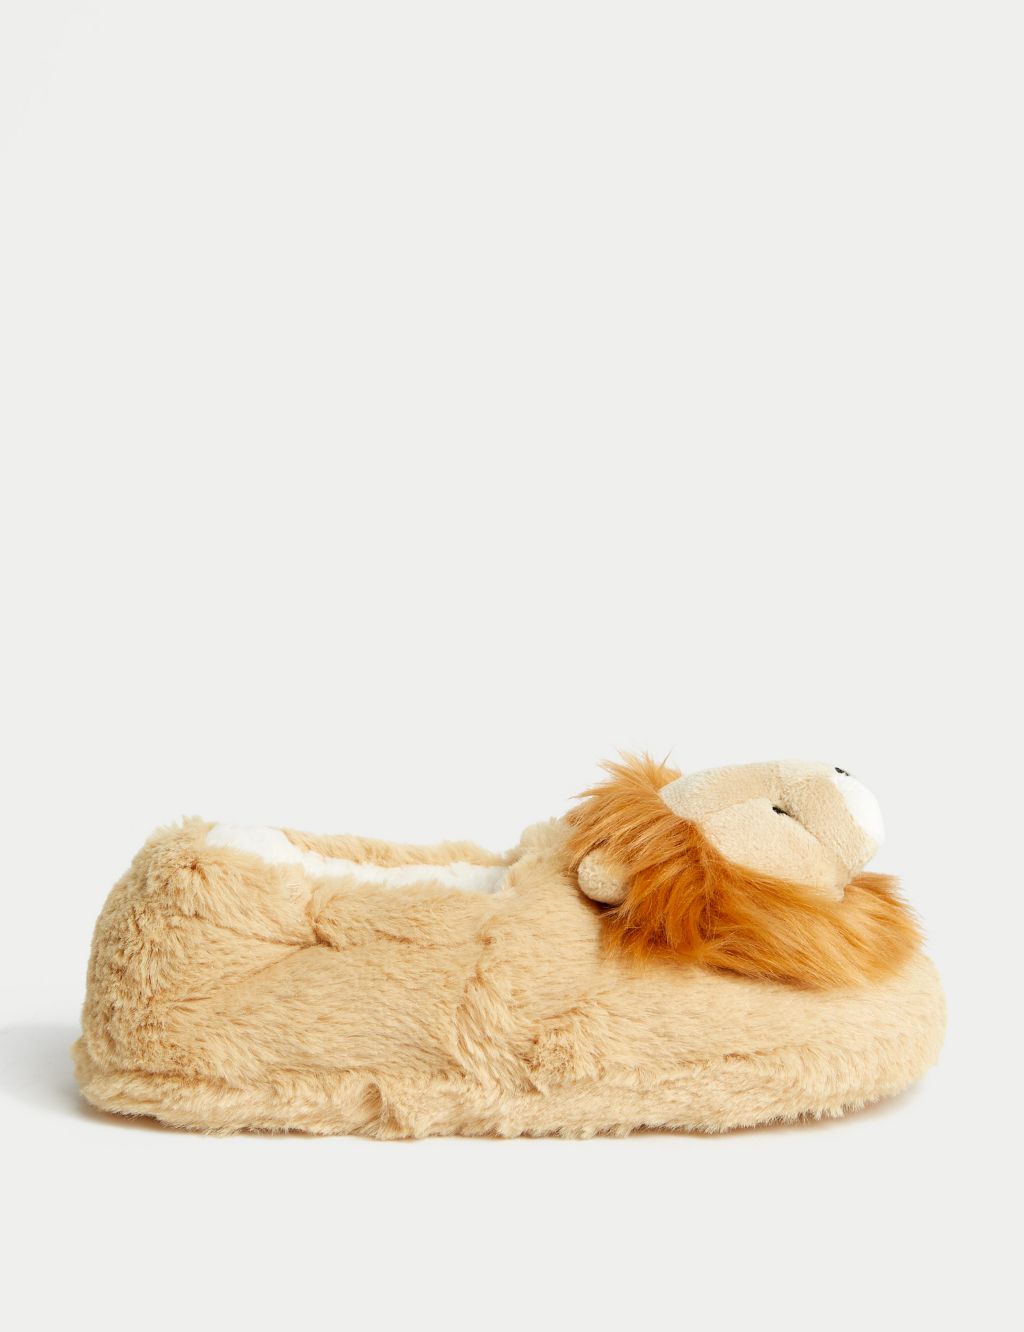 Kids' Faux Fur Lion Slippers (4 Small - 7 Large) image 1